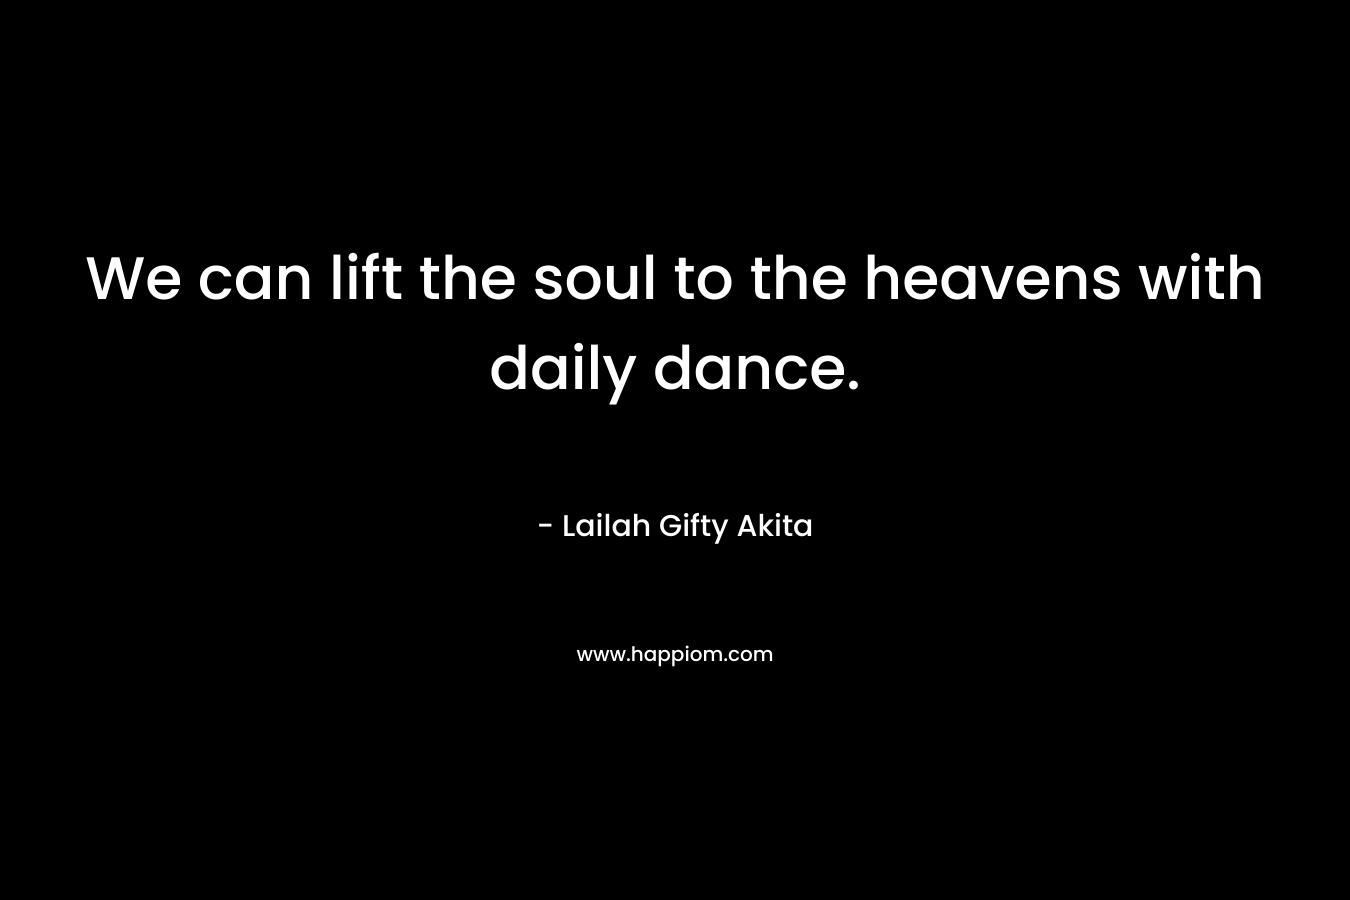 We can lift the soul to the heavens with daily dance.